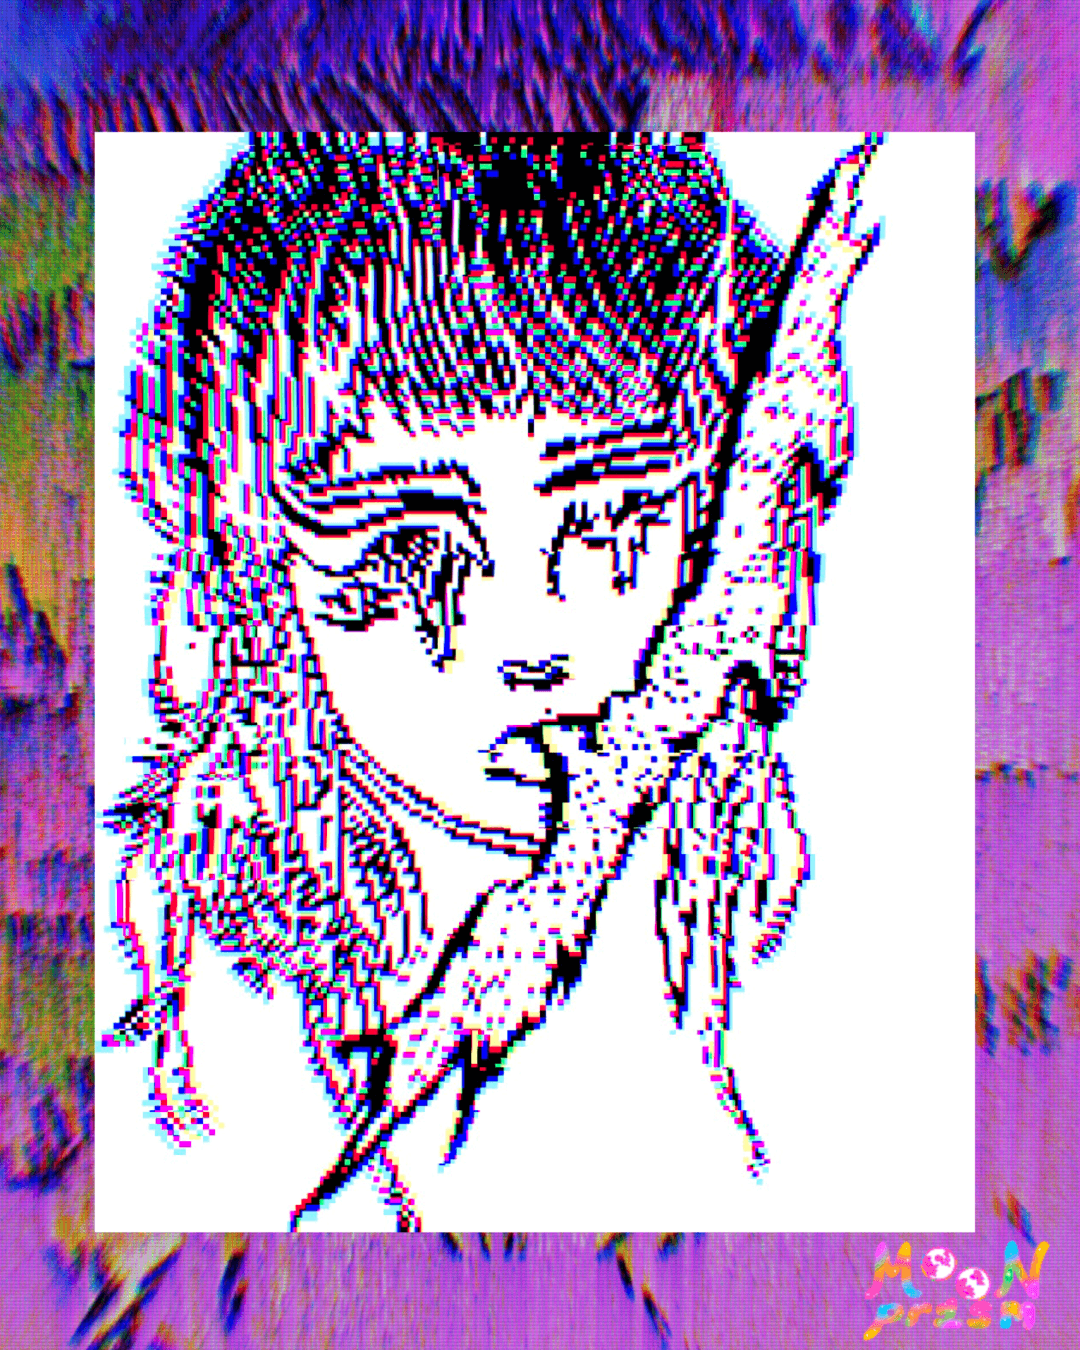 An illustration of a glitched out woman with melting eyes licking a jagged electric looking shape. This is an homage to ocular migraines.